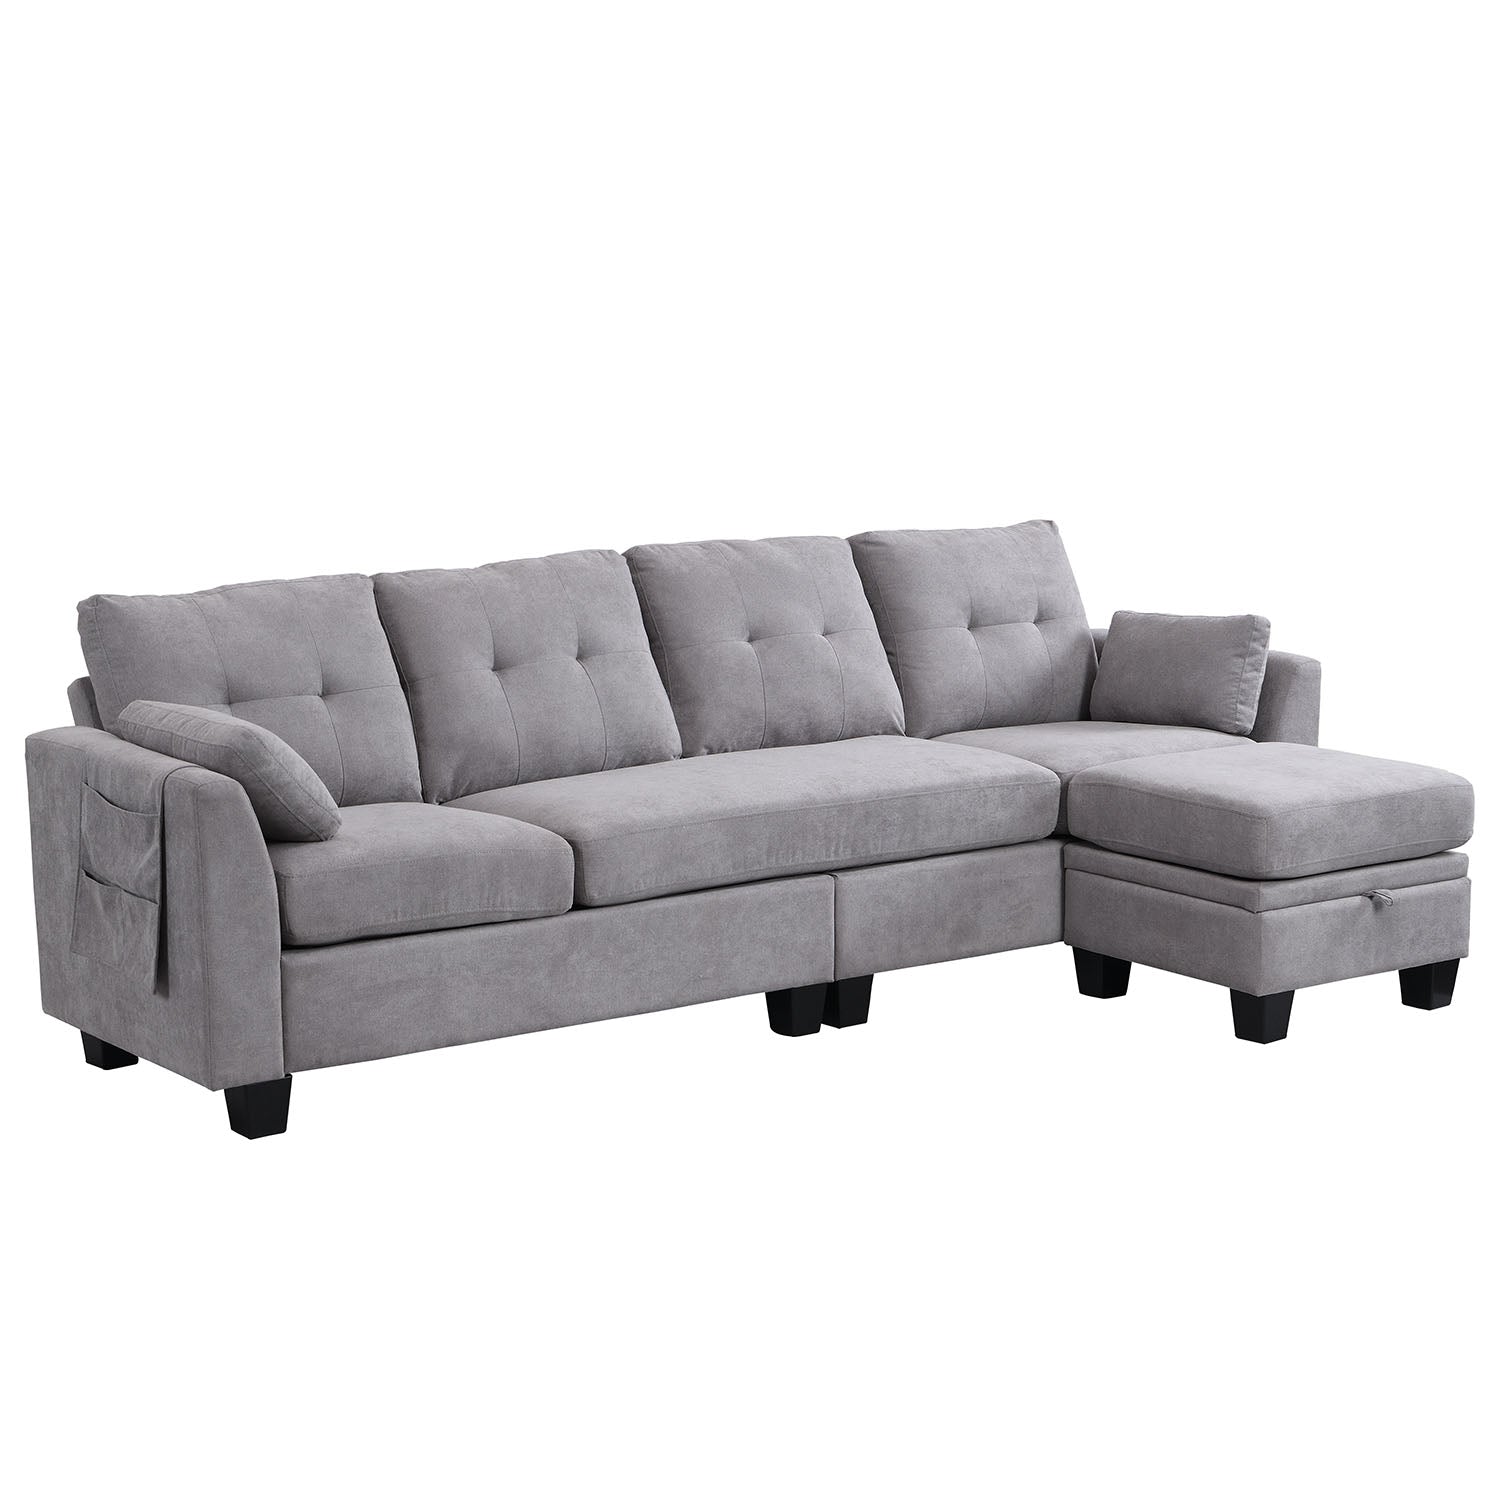 Brunswick Large 4-Seater Storage Chaise Sofa in Light Grey